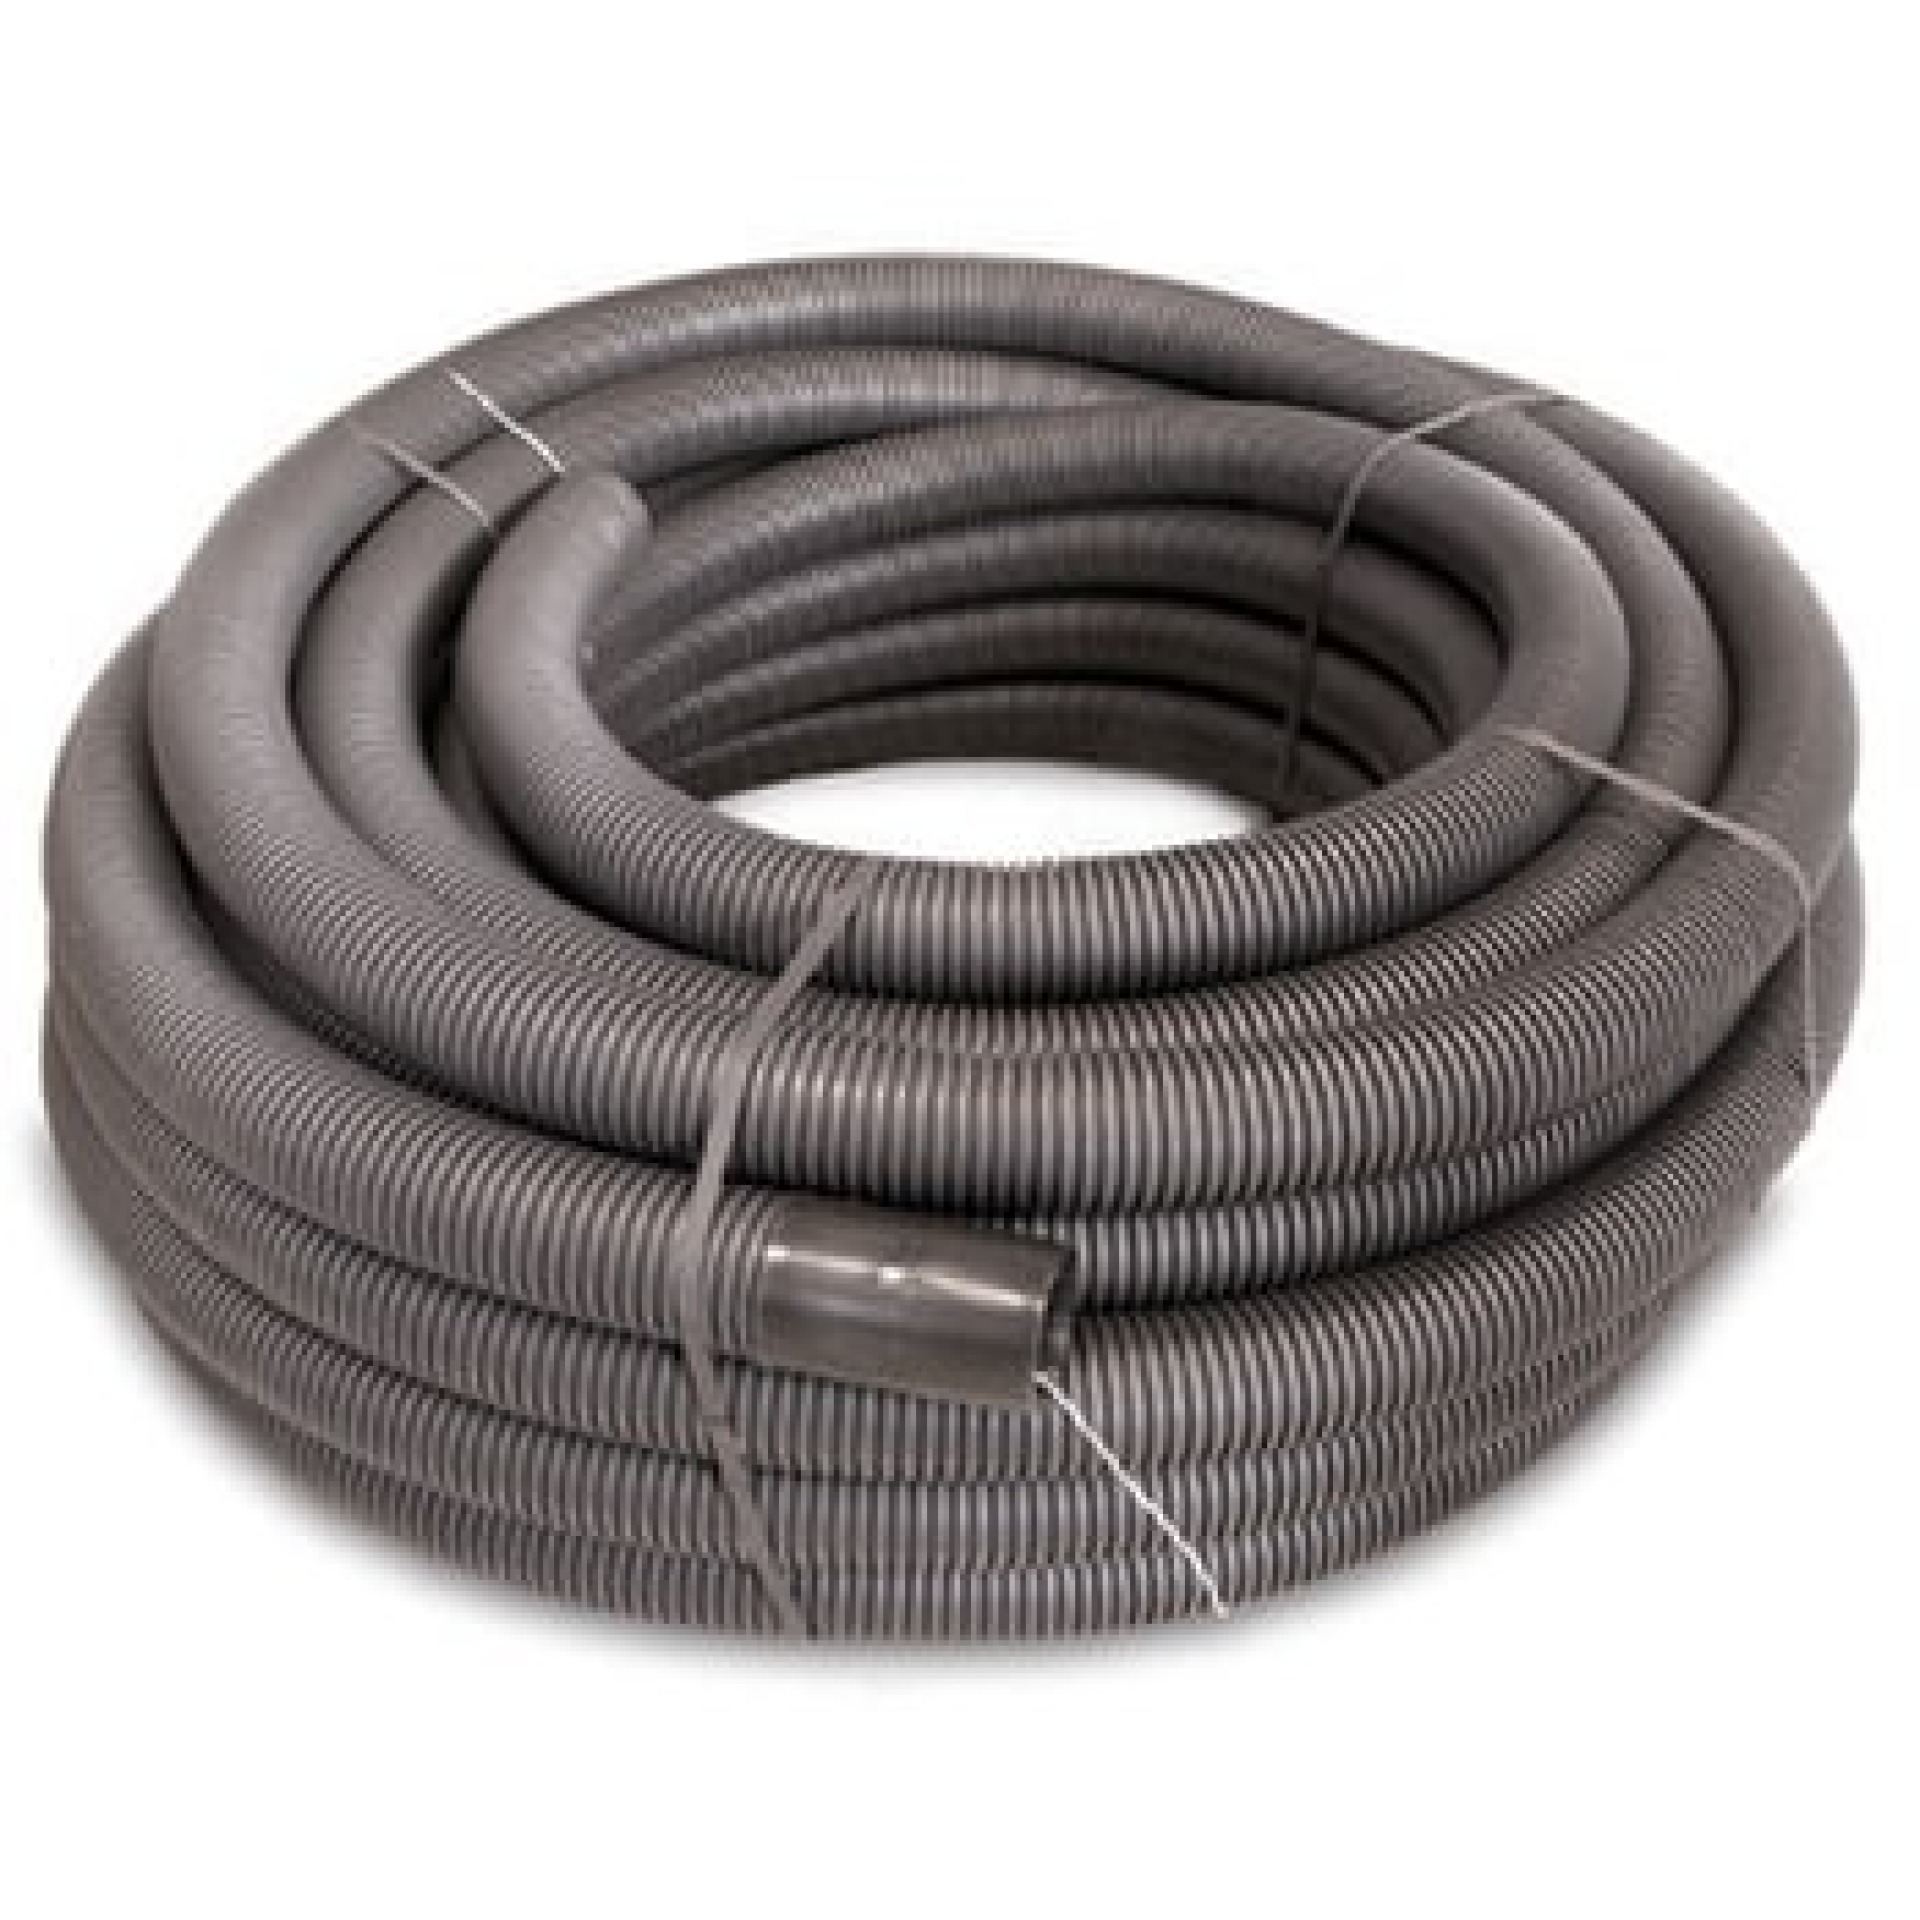 Flexible Conduit 160mm halogenfree, dobb wall, with draw-in wire black